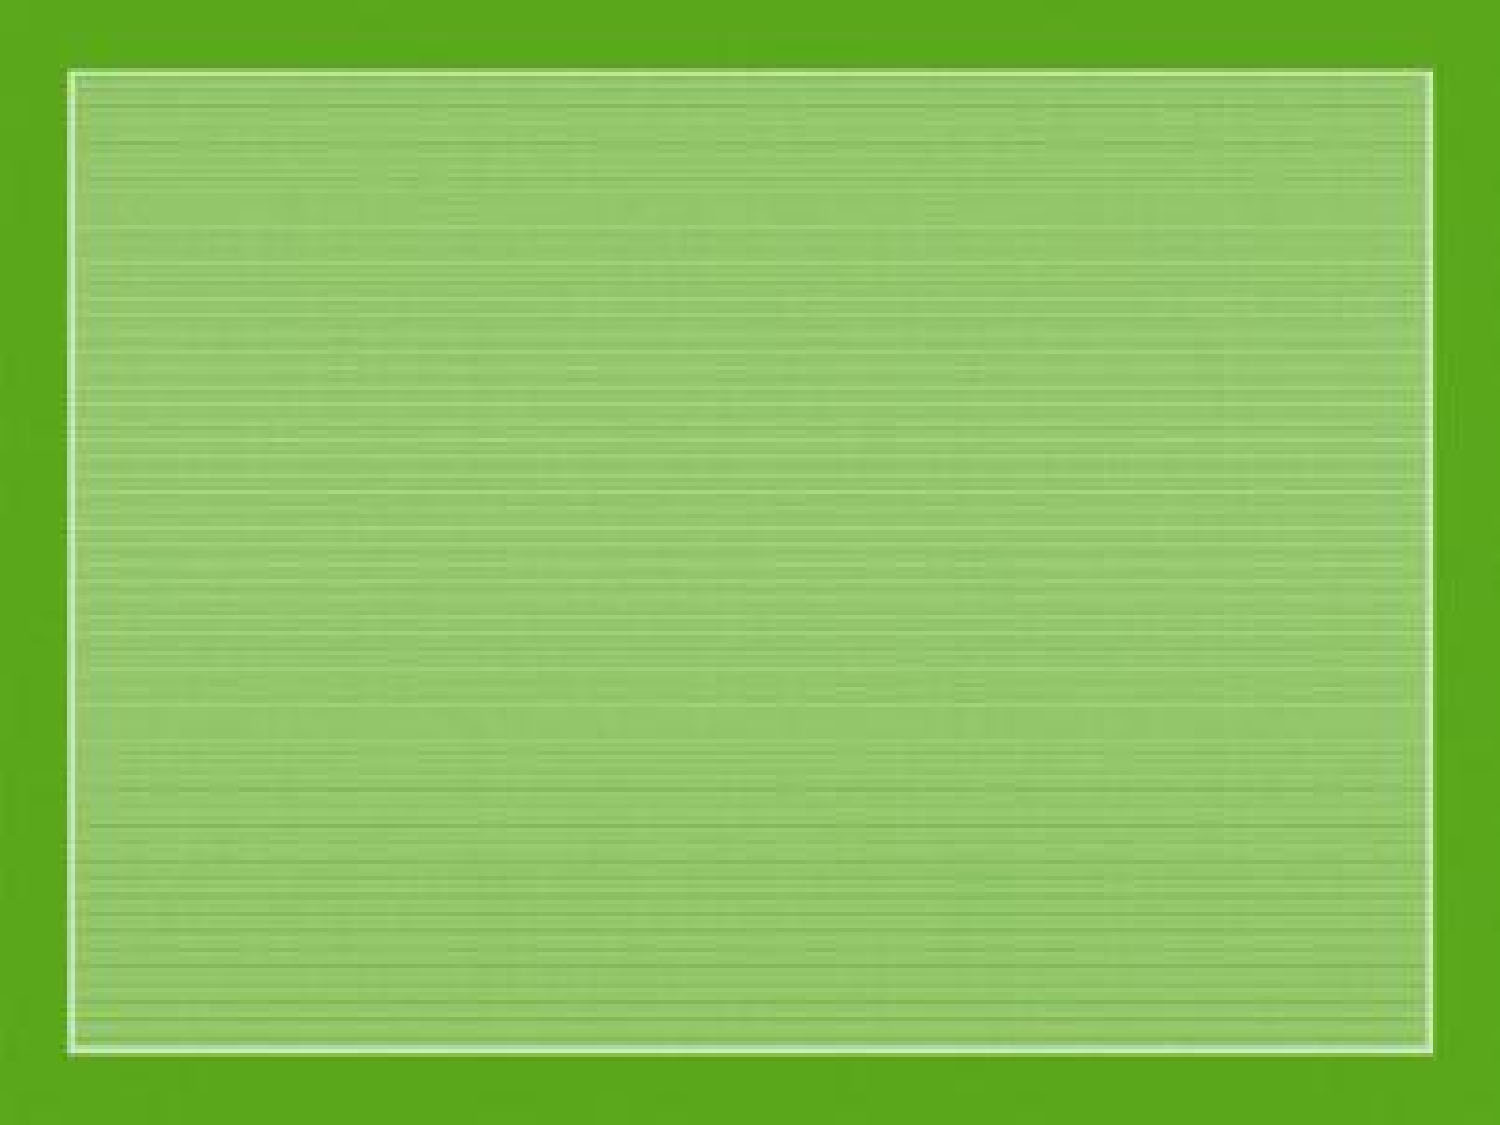 Simple Green Frame backgrounds